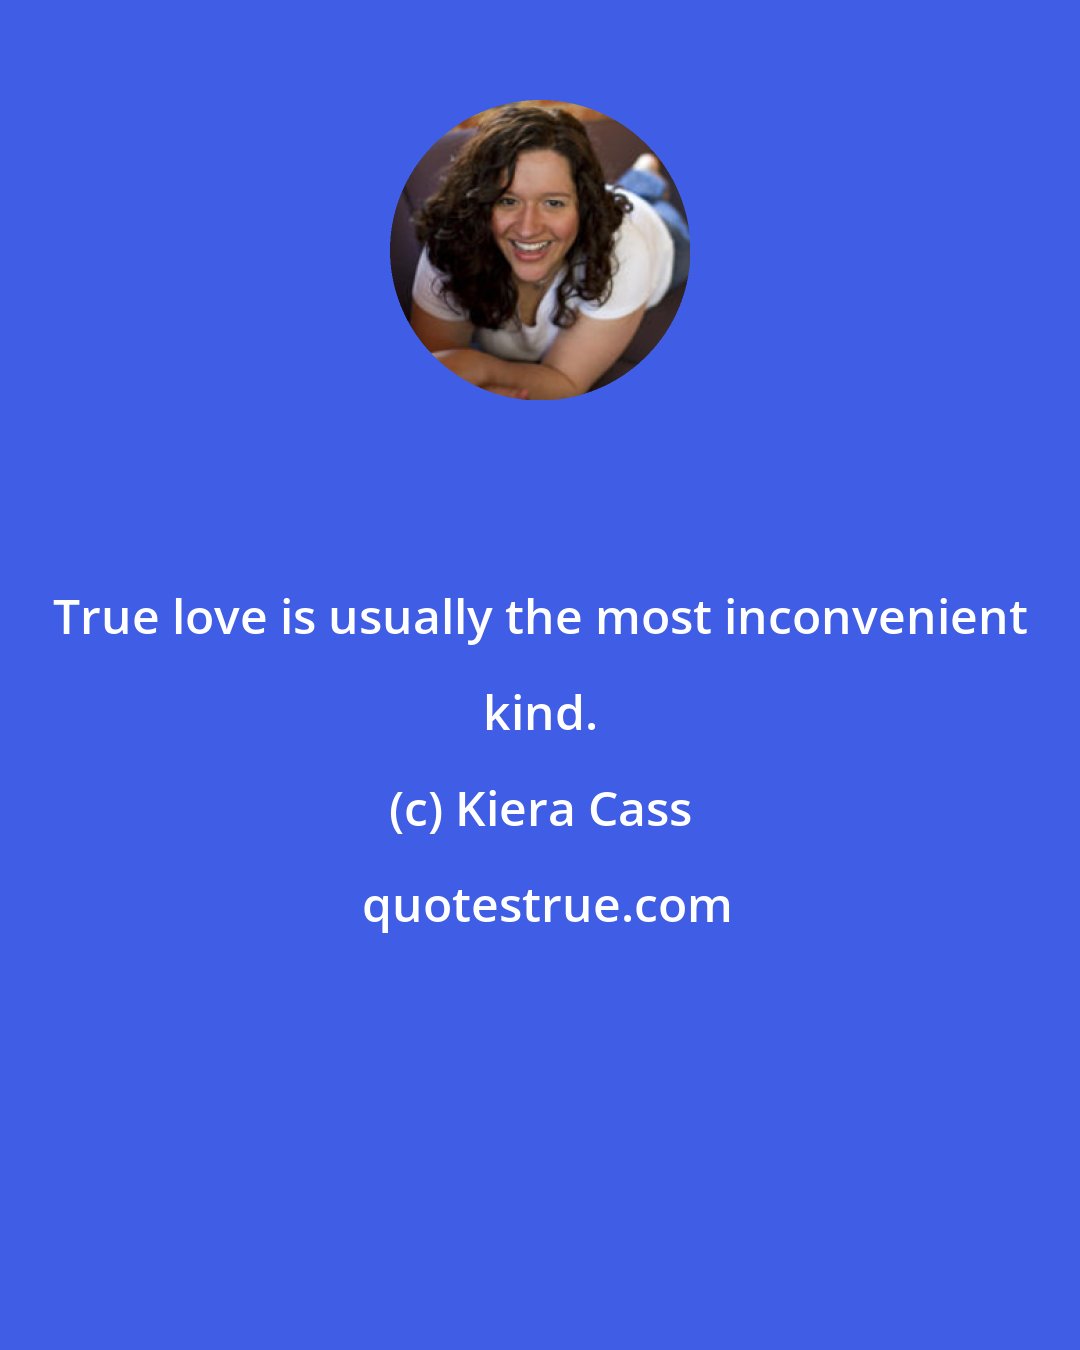 Kiera Cass: True love is usually the most inconvenient kind.